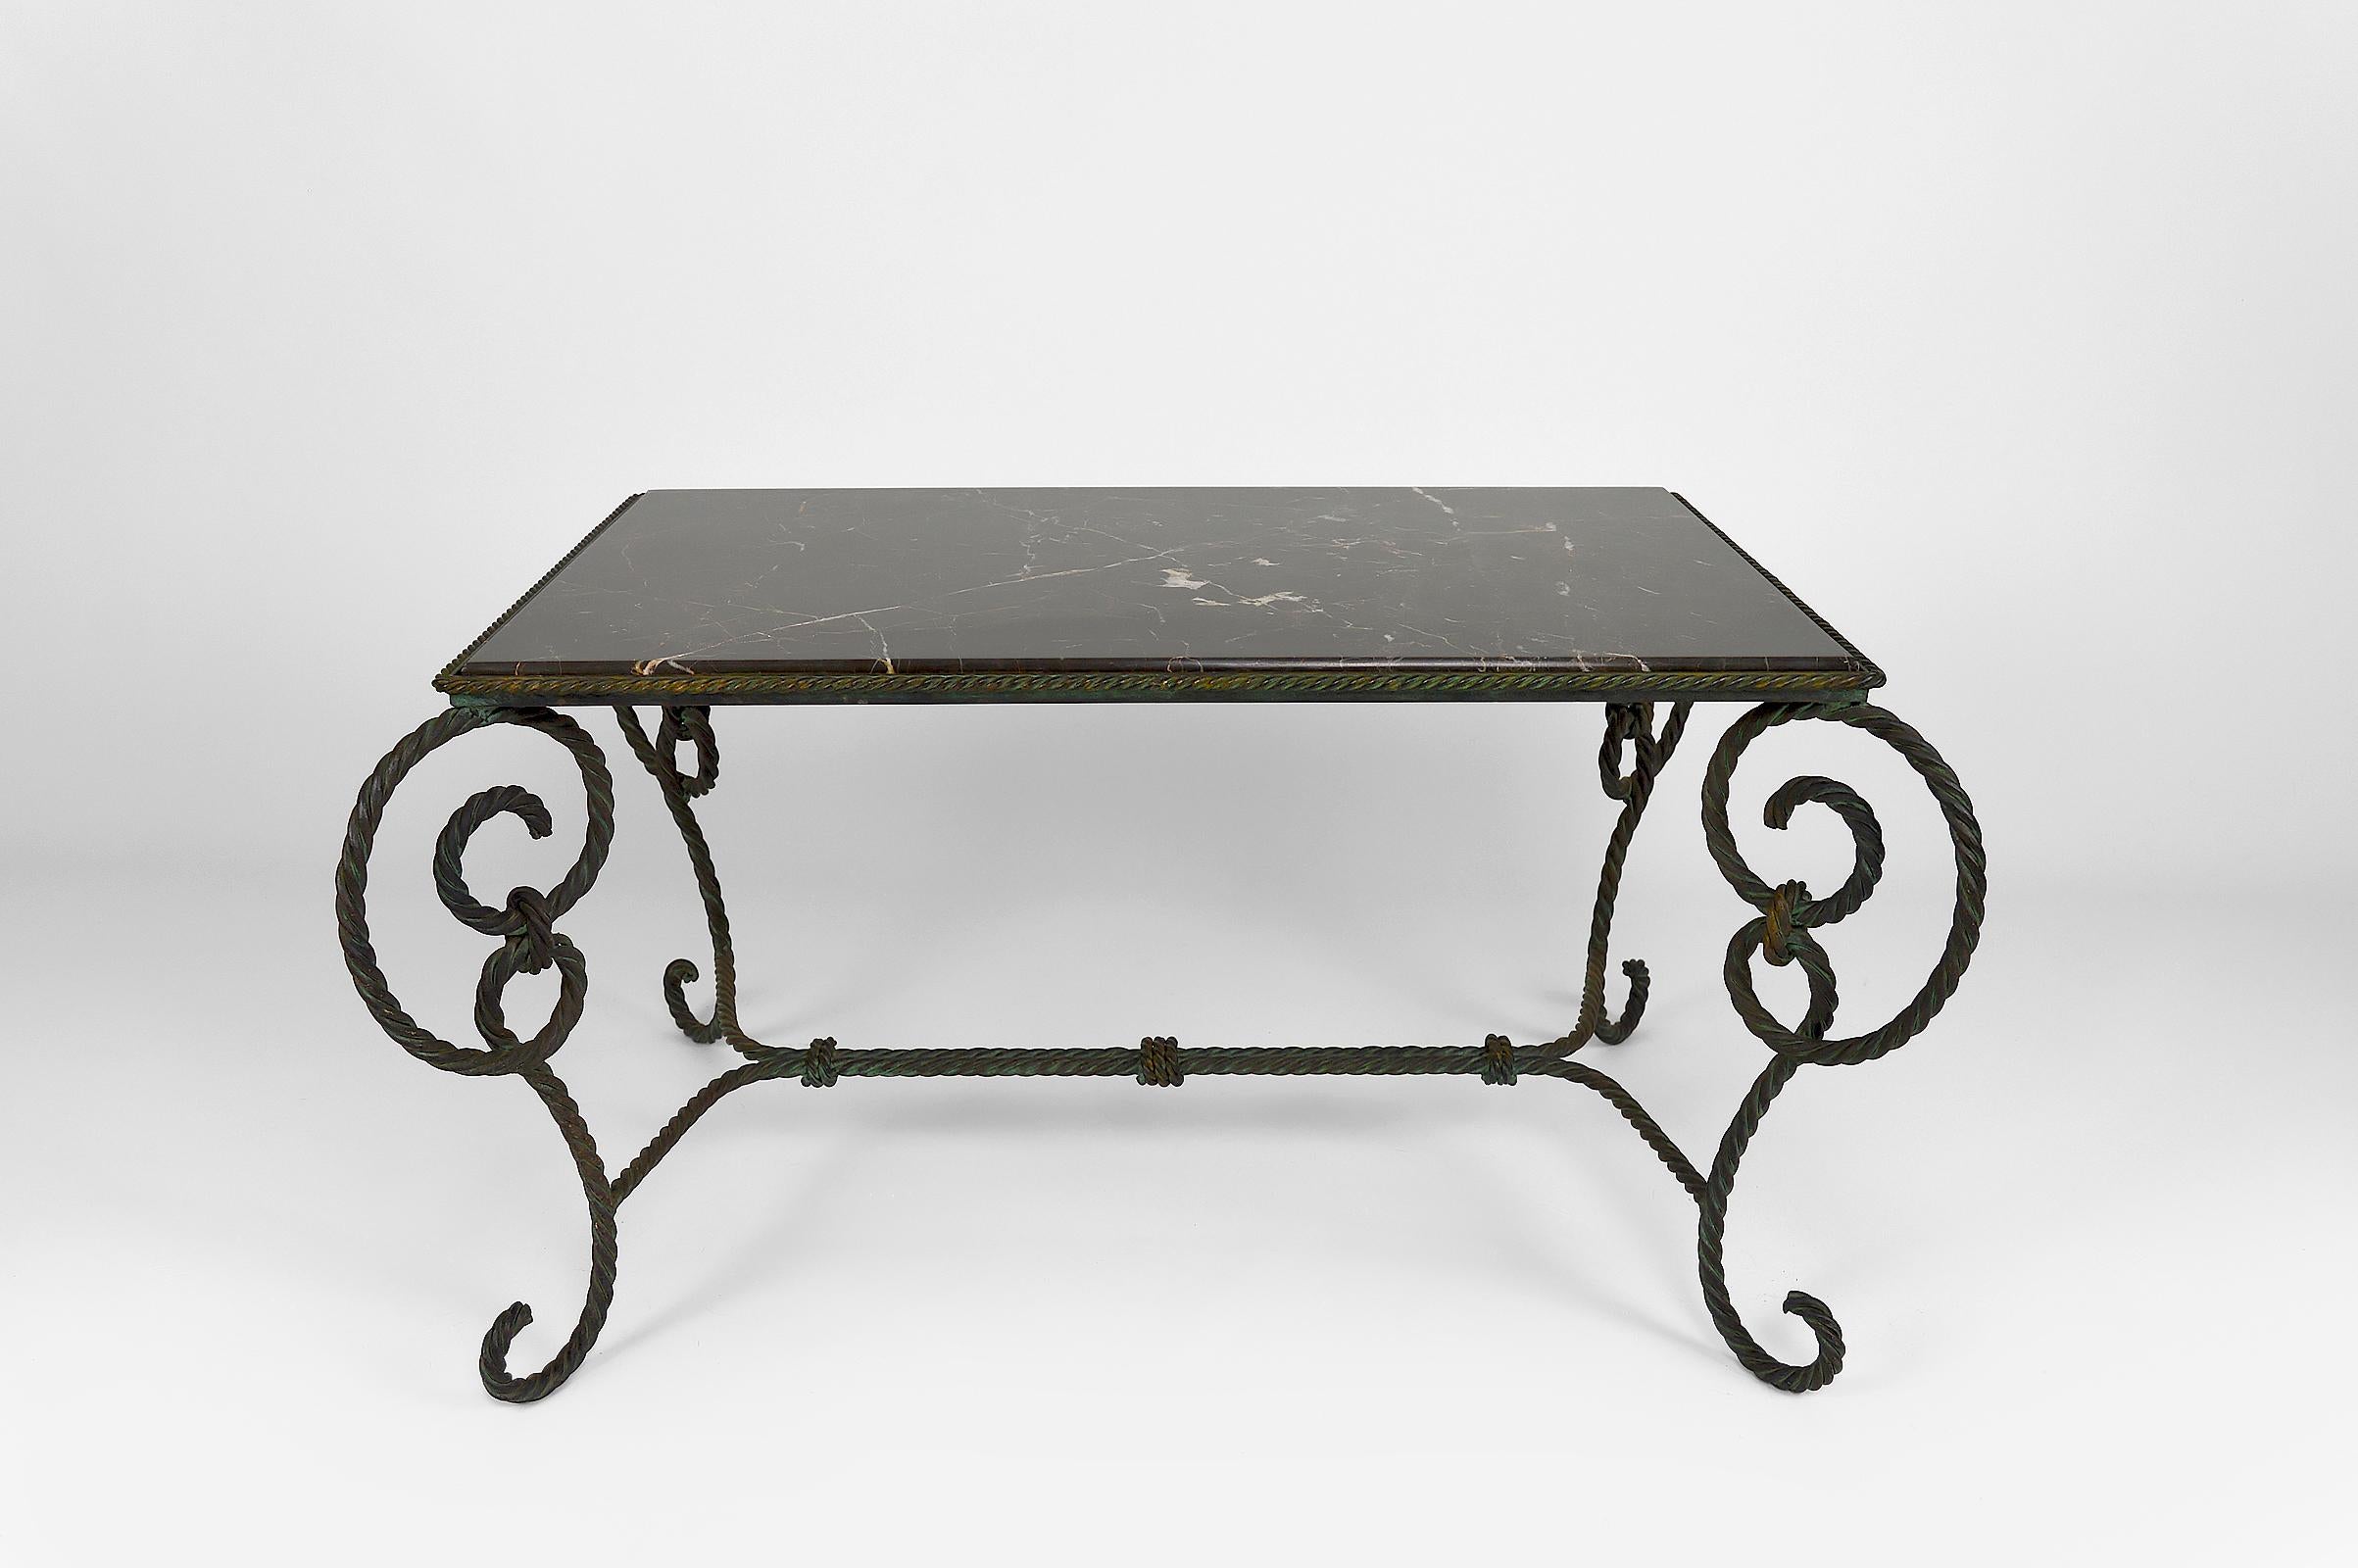 Mid-20th Century Rectangular Art Deco Coffee Table in Wrought Iron and Black Marble, France, 1940 For Sale